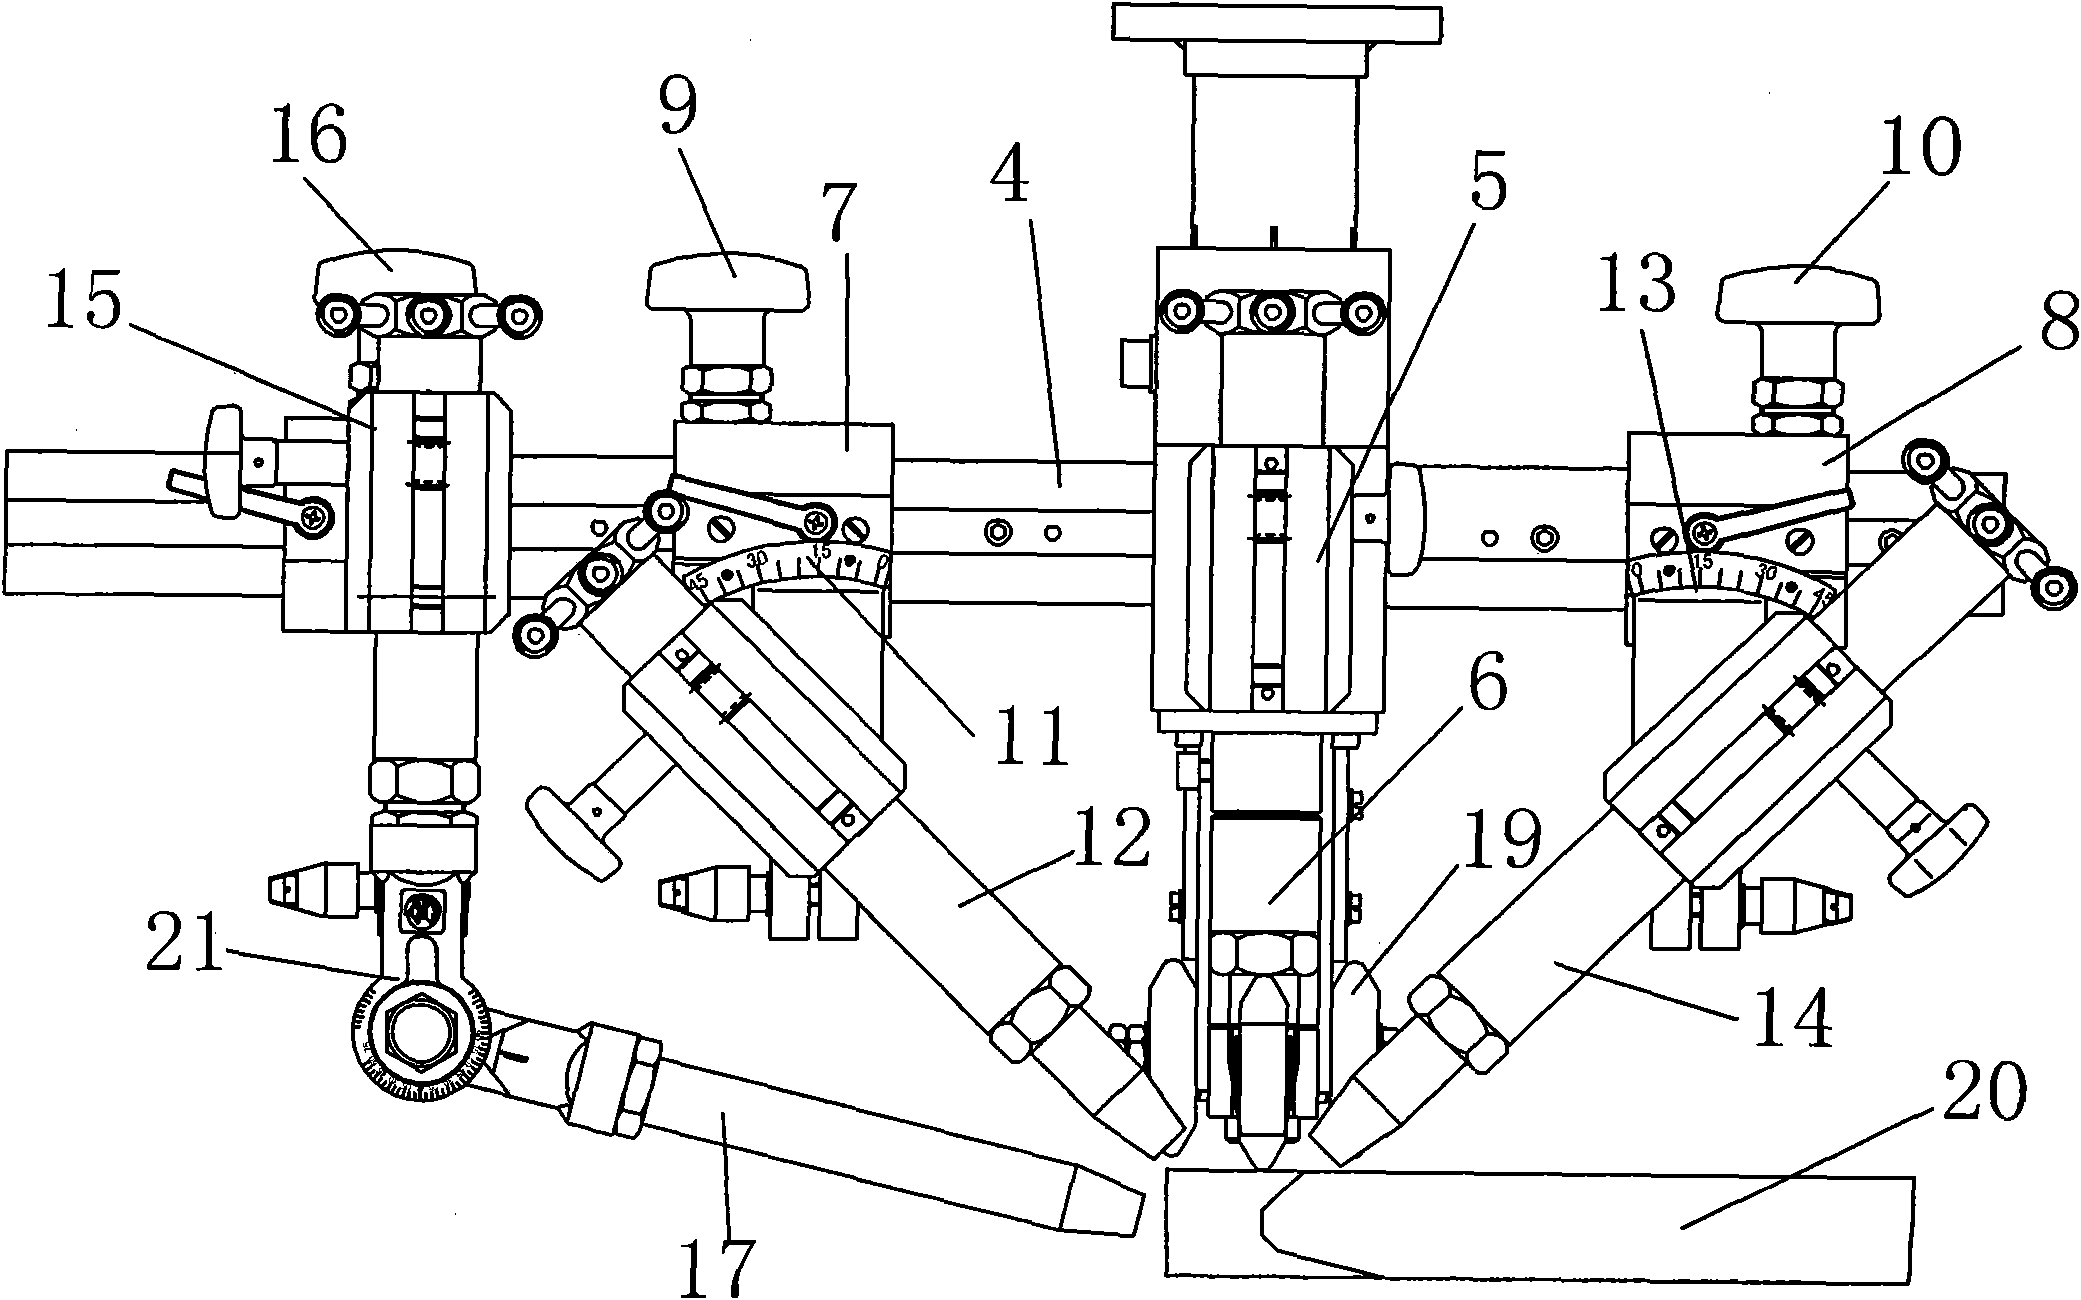 Linear groove and transition groove cutter device